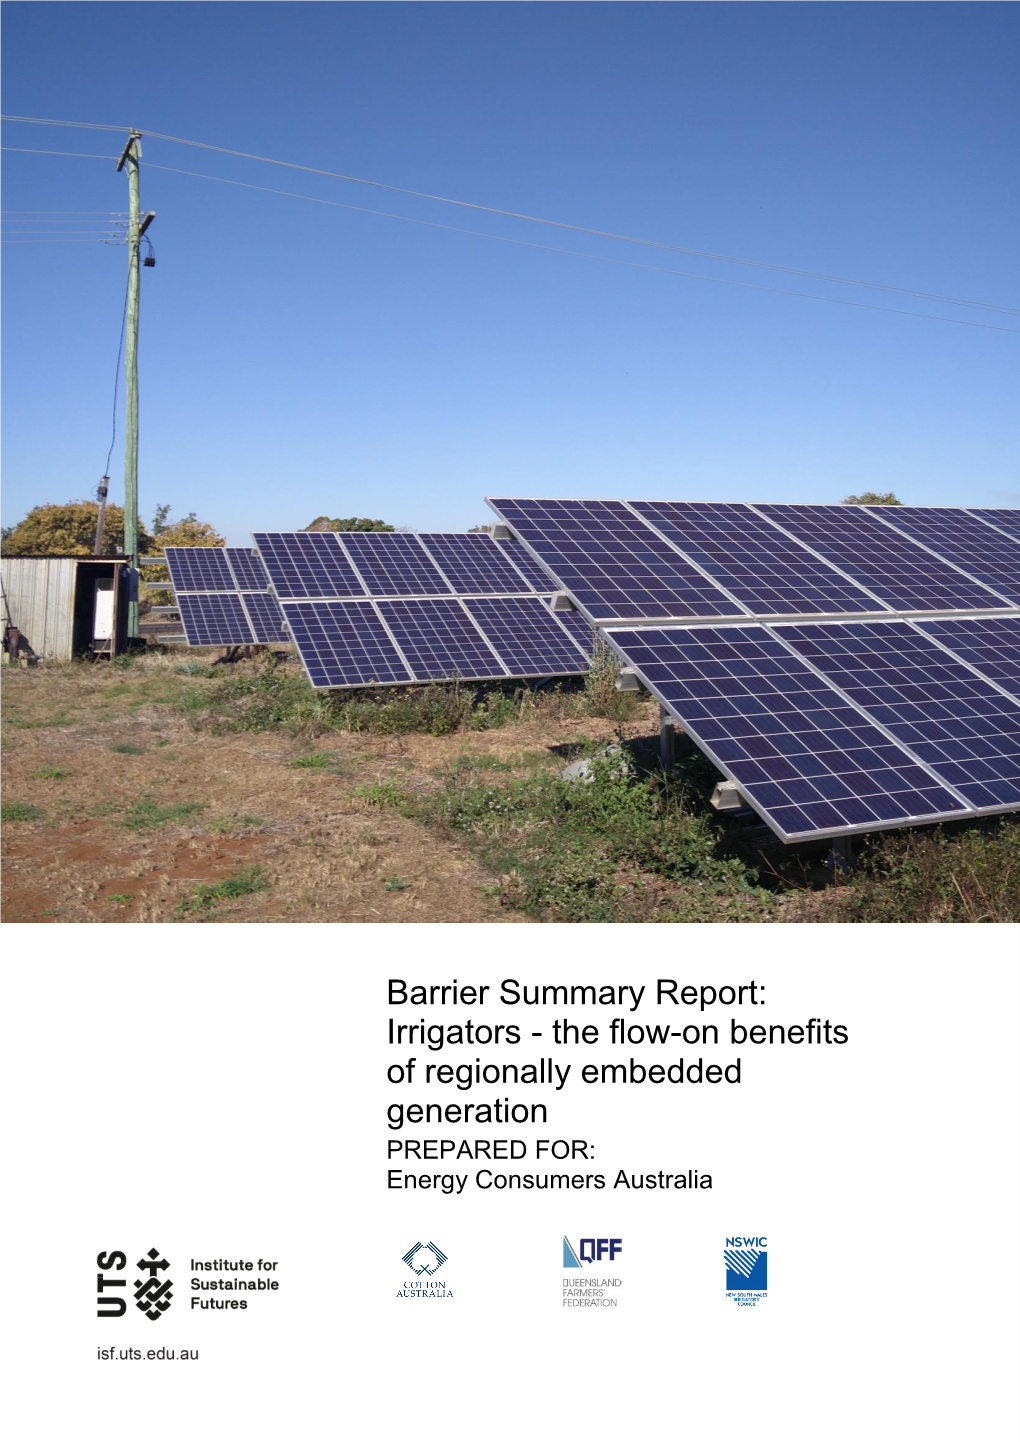 Barrier Summary Report: Irrigators - the Flow-On Benefits of Regionally Embedded Generation PREPARED FOR: Energy Consumers Australia